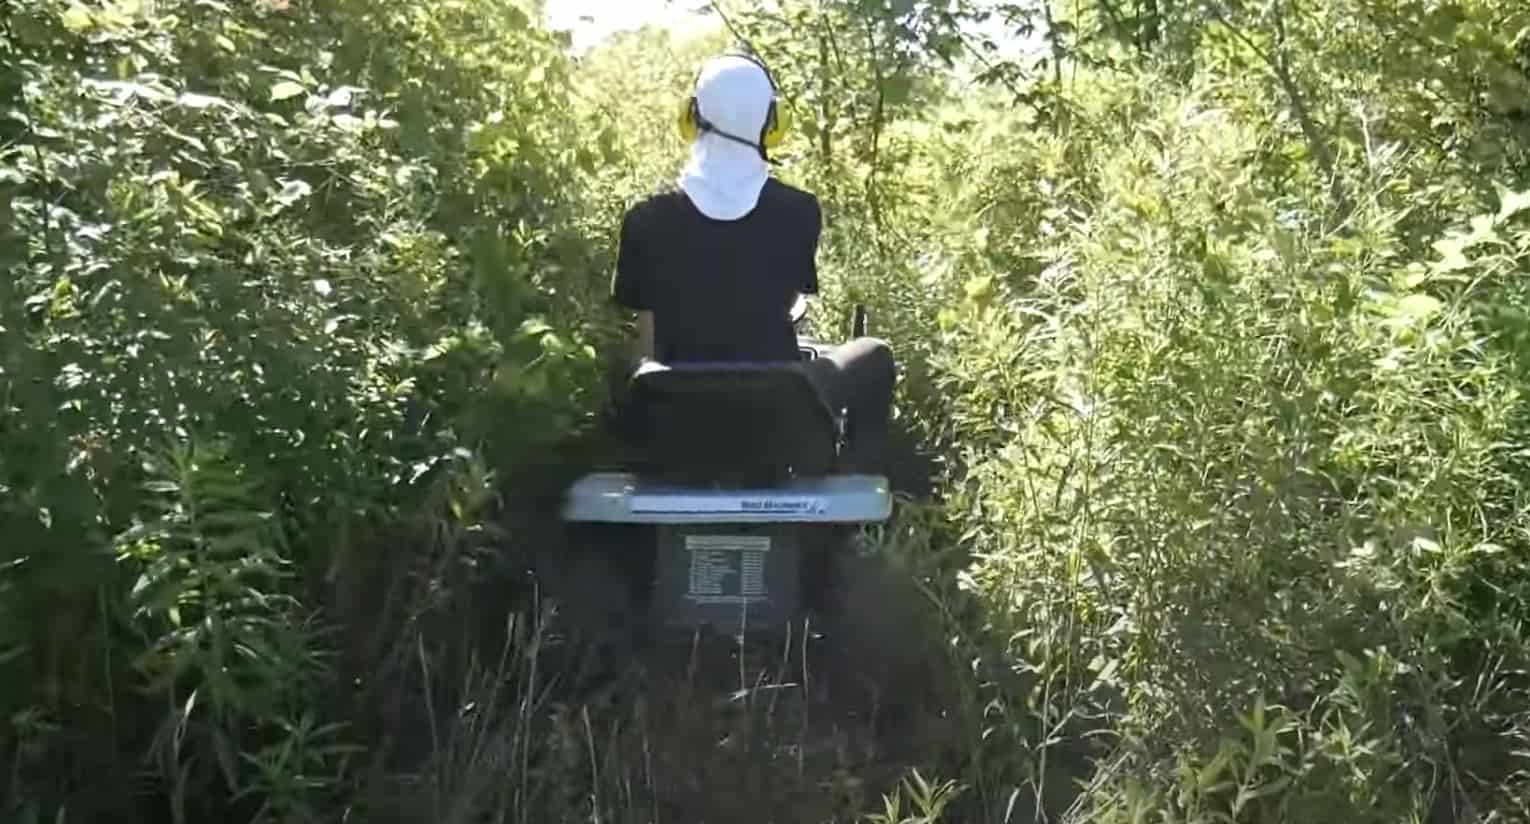 clearing brush with lawn garden tractor dense green brush on both sides man riding mower